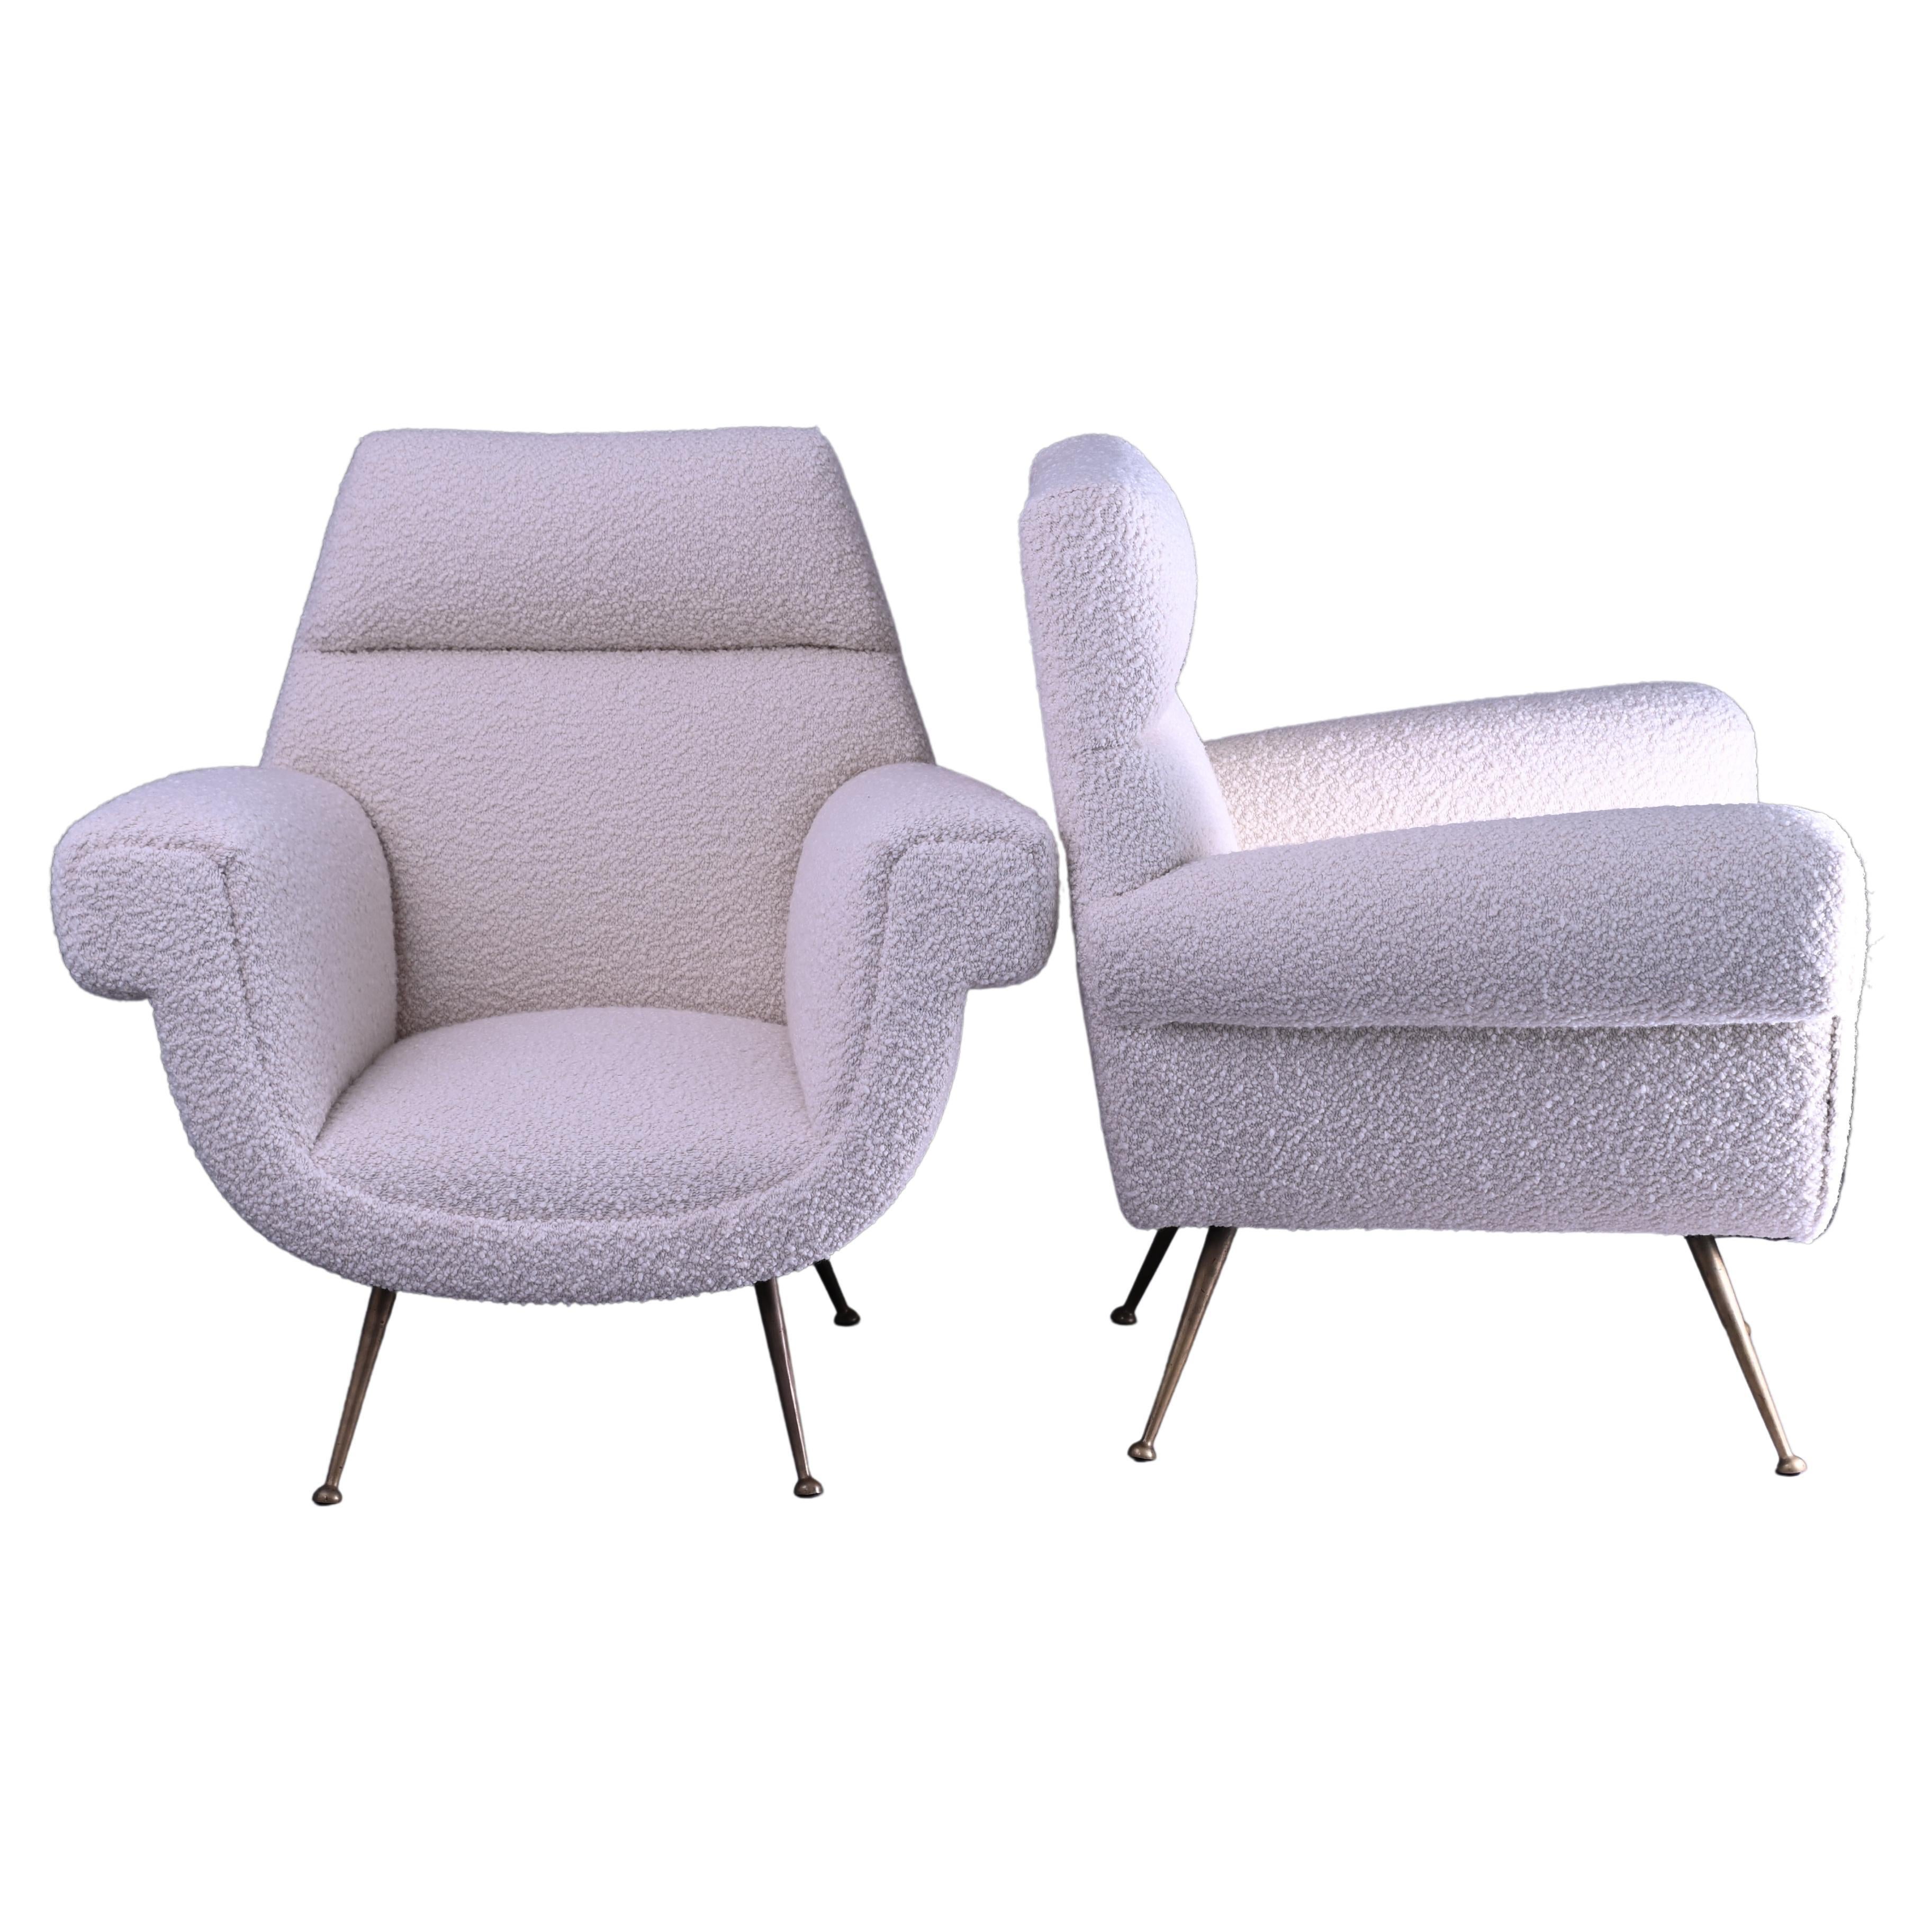 A Pair of 1950's Italian Armchairs by Gigi Radice For Sale